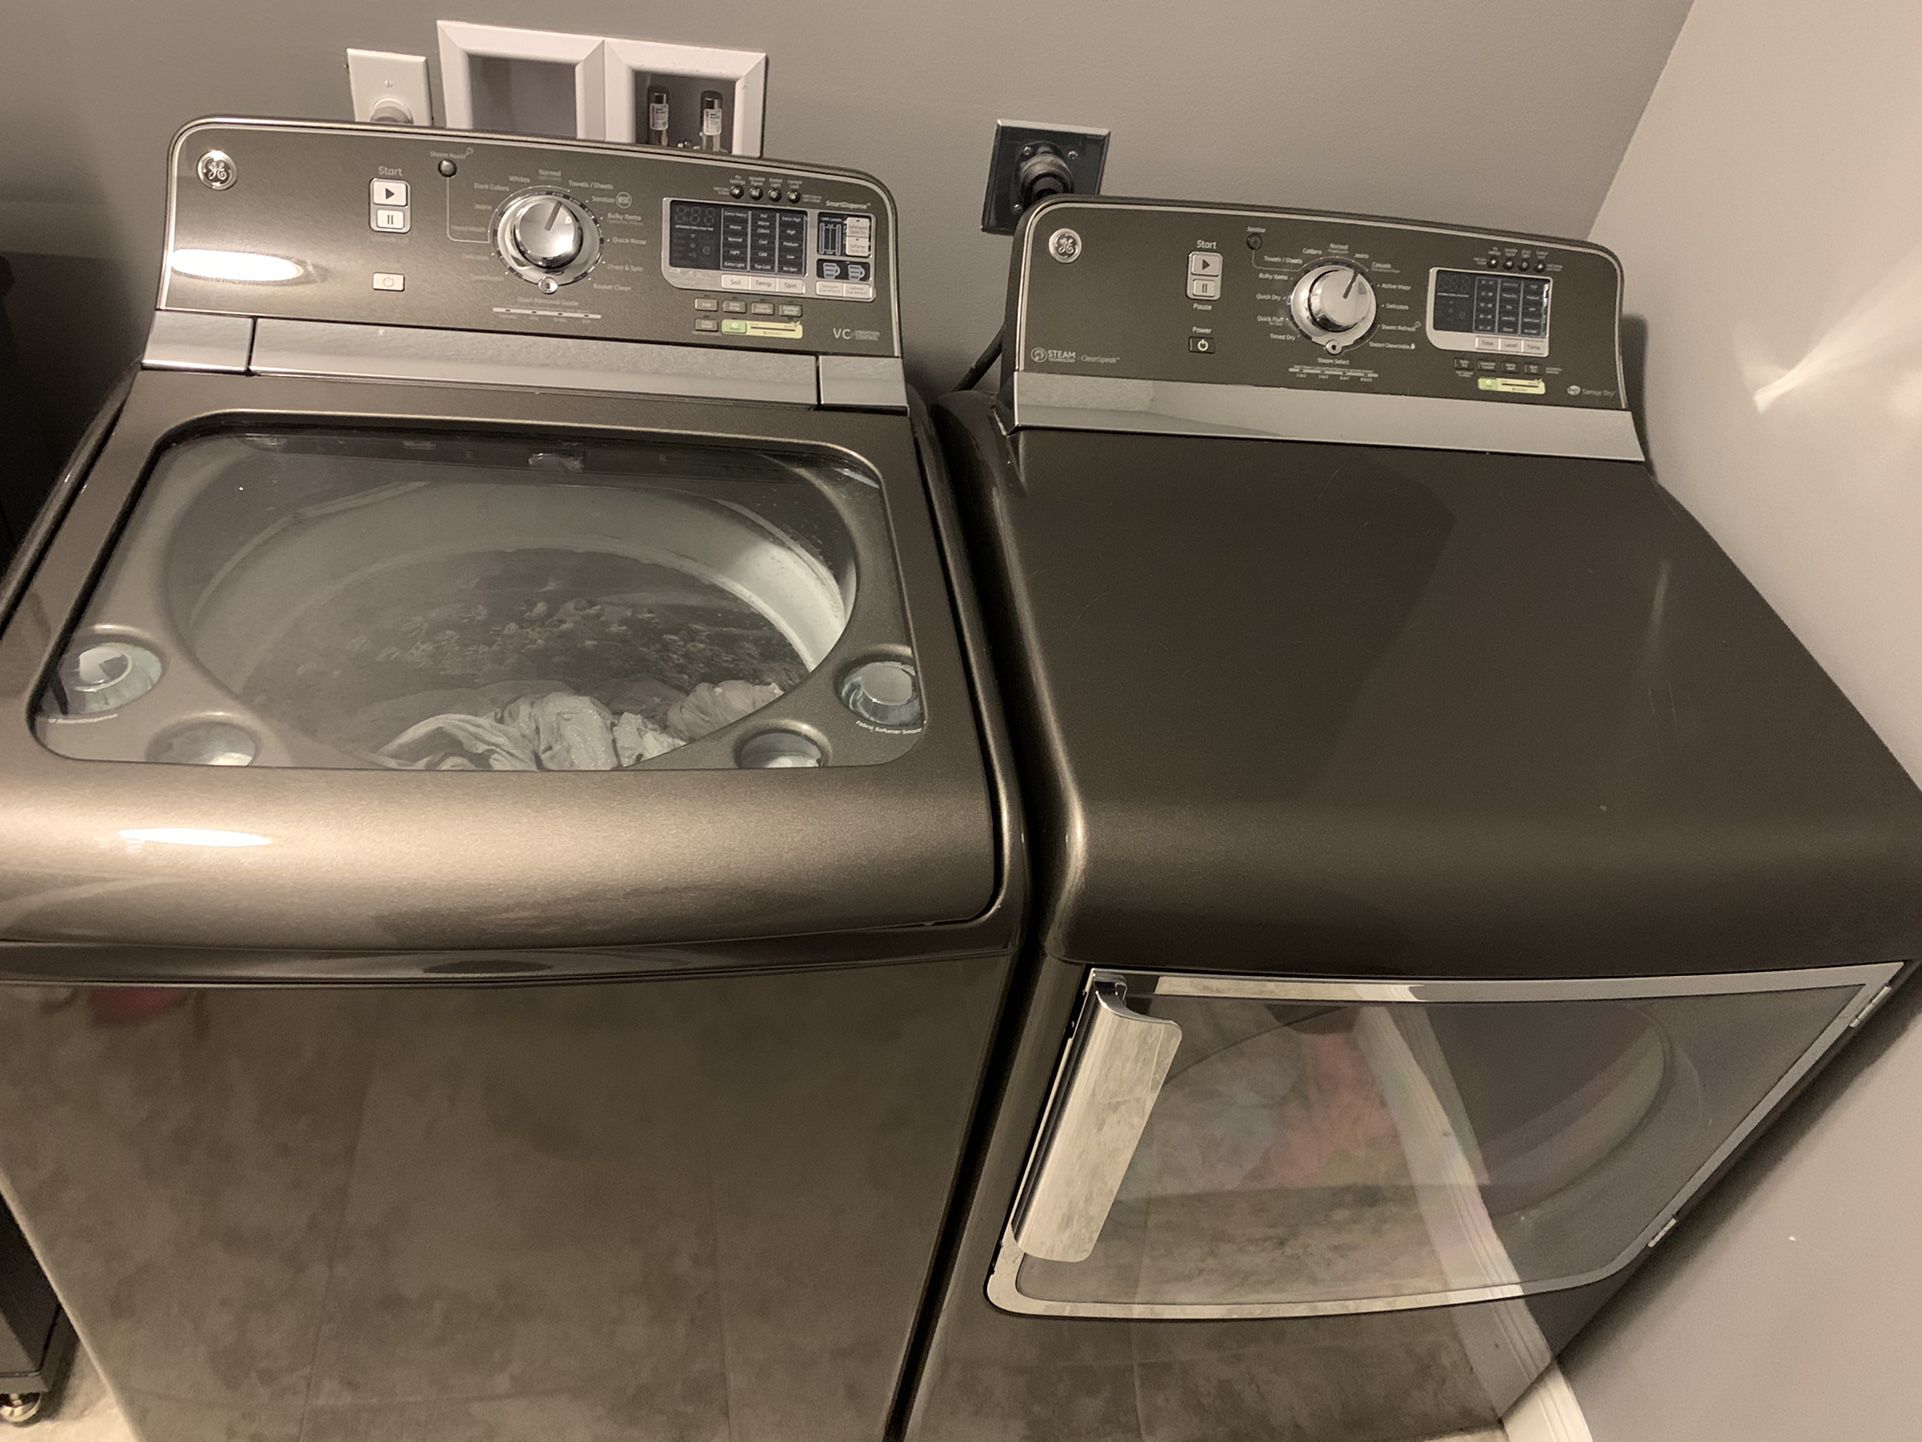 GE High Efficiency Washer And Dryer